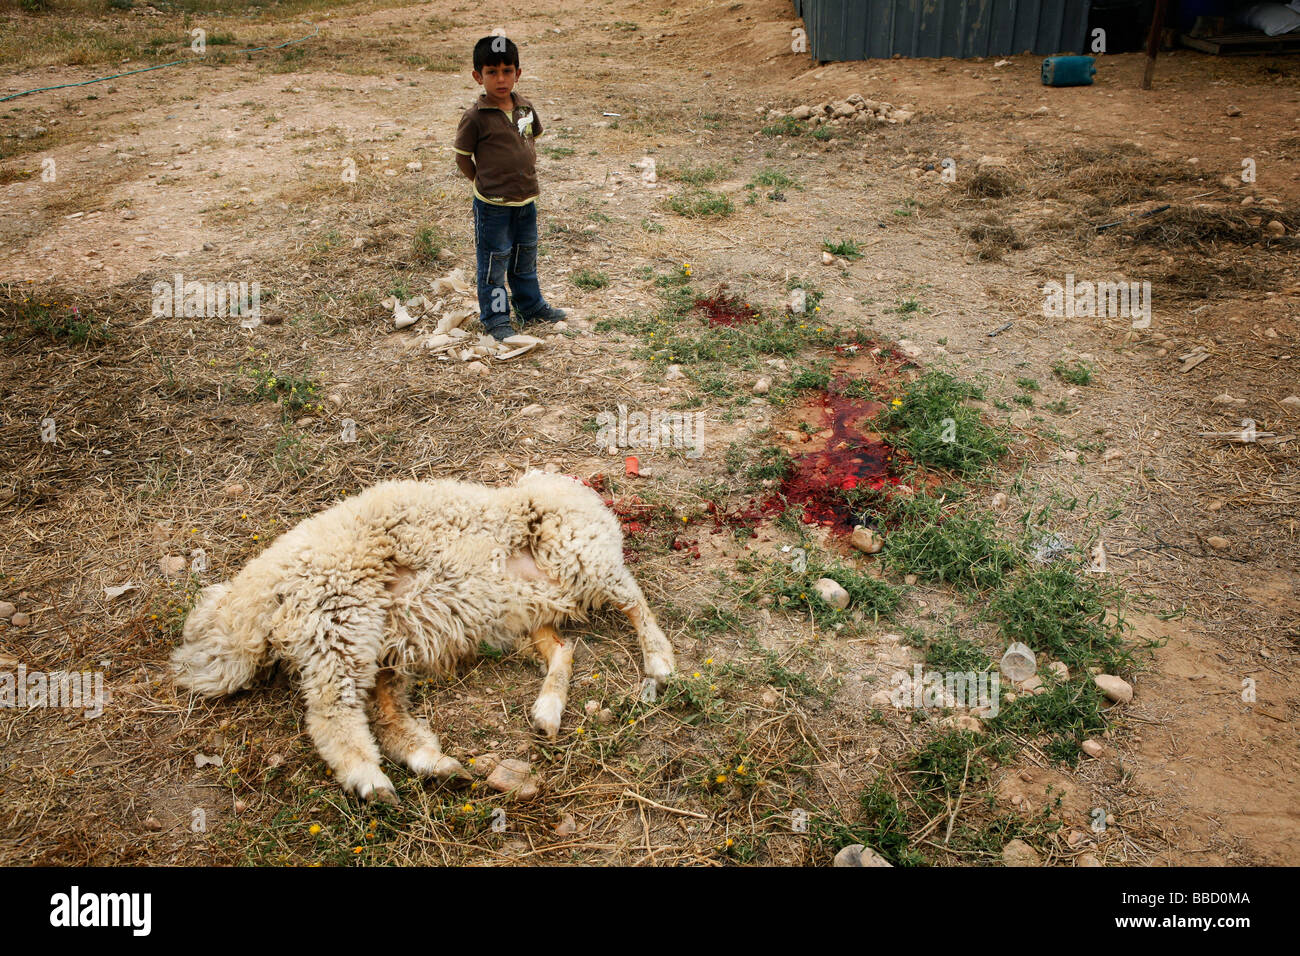 A child stands behind a sheep which has just been killed and will shortly be eaten. El Araqeeb, Israel Stock Photo